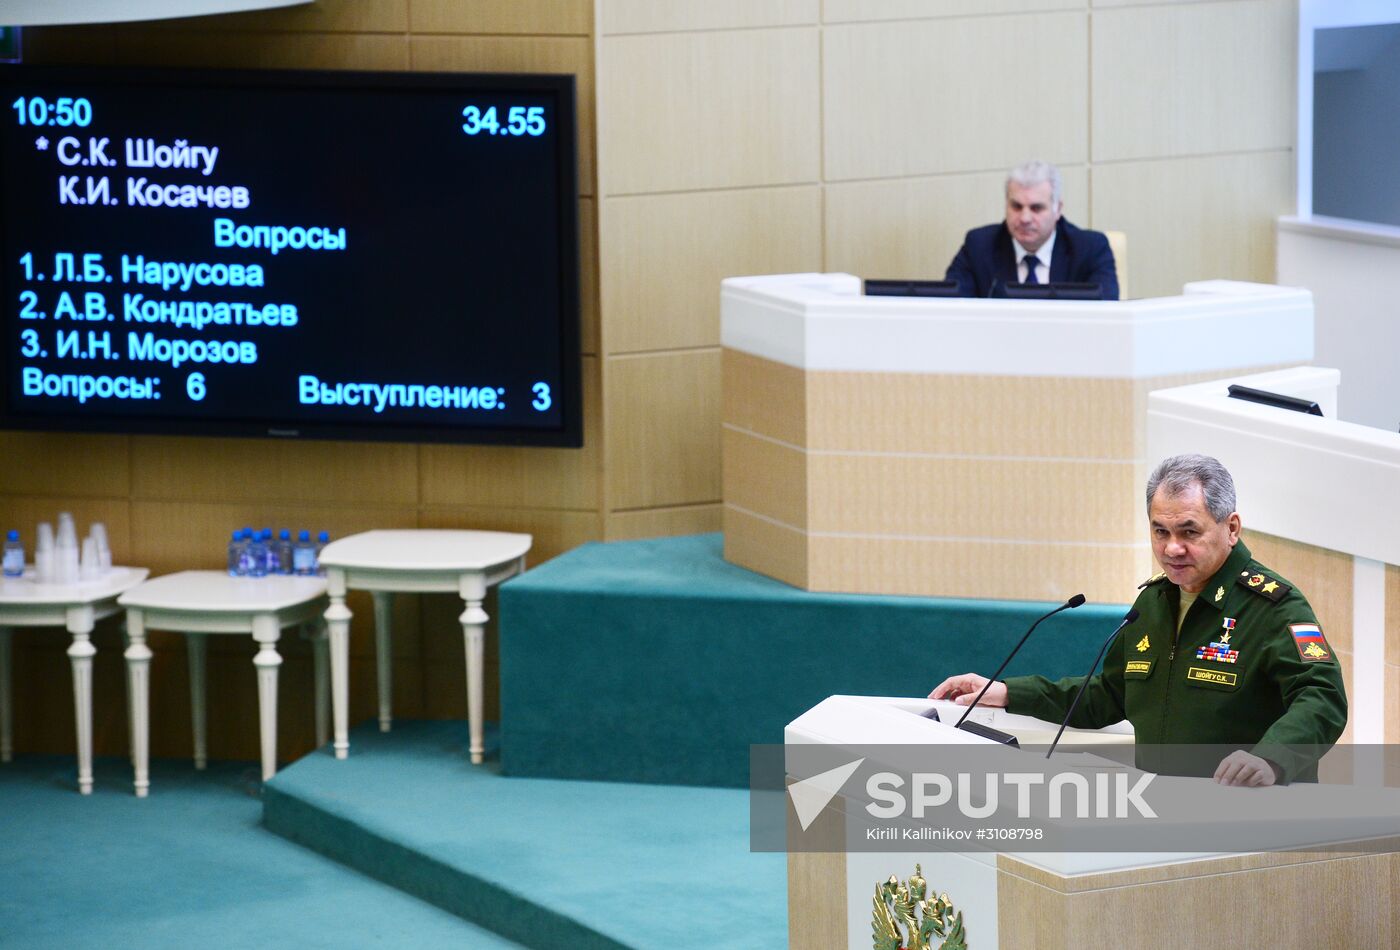 Federation Council session